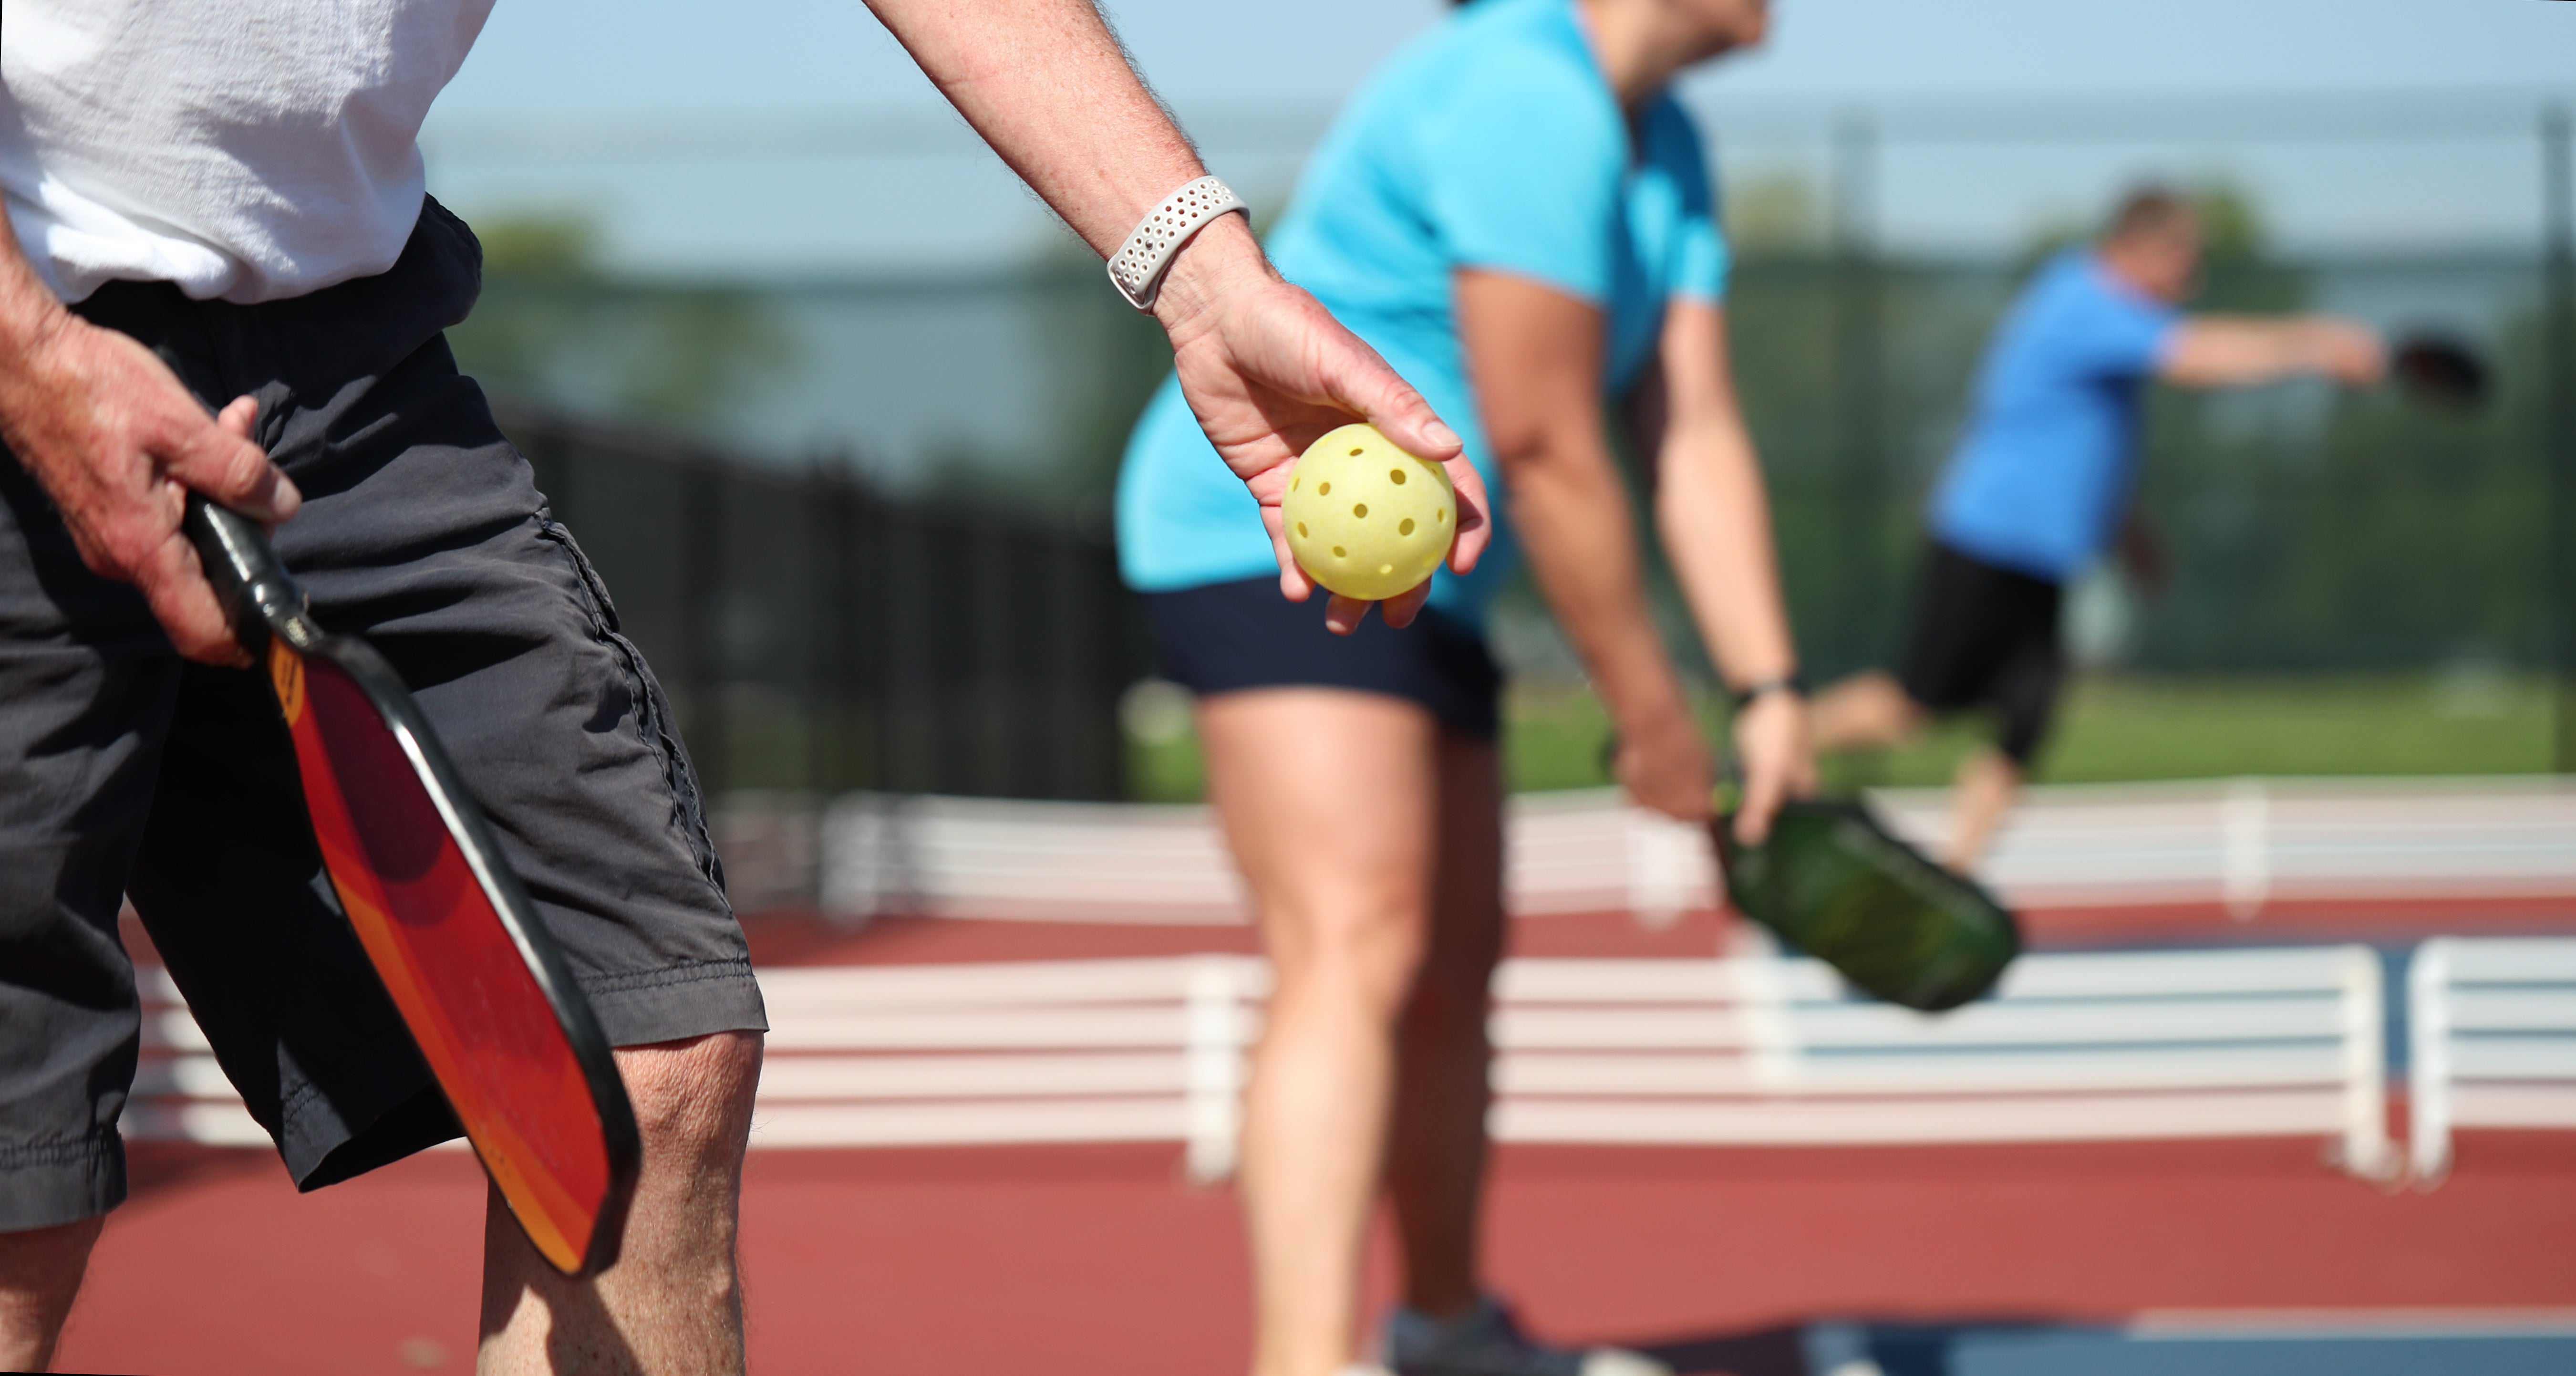 Dive into Pickleball: Fun, Fitness, and How to Stay Healthy While You Play